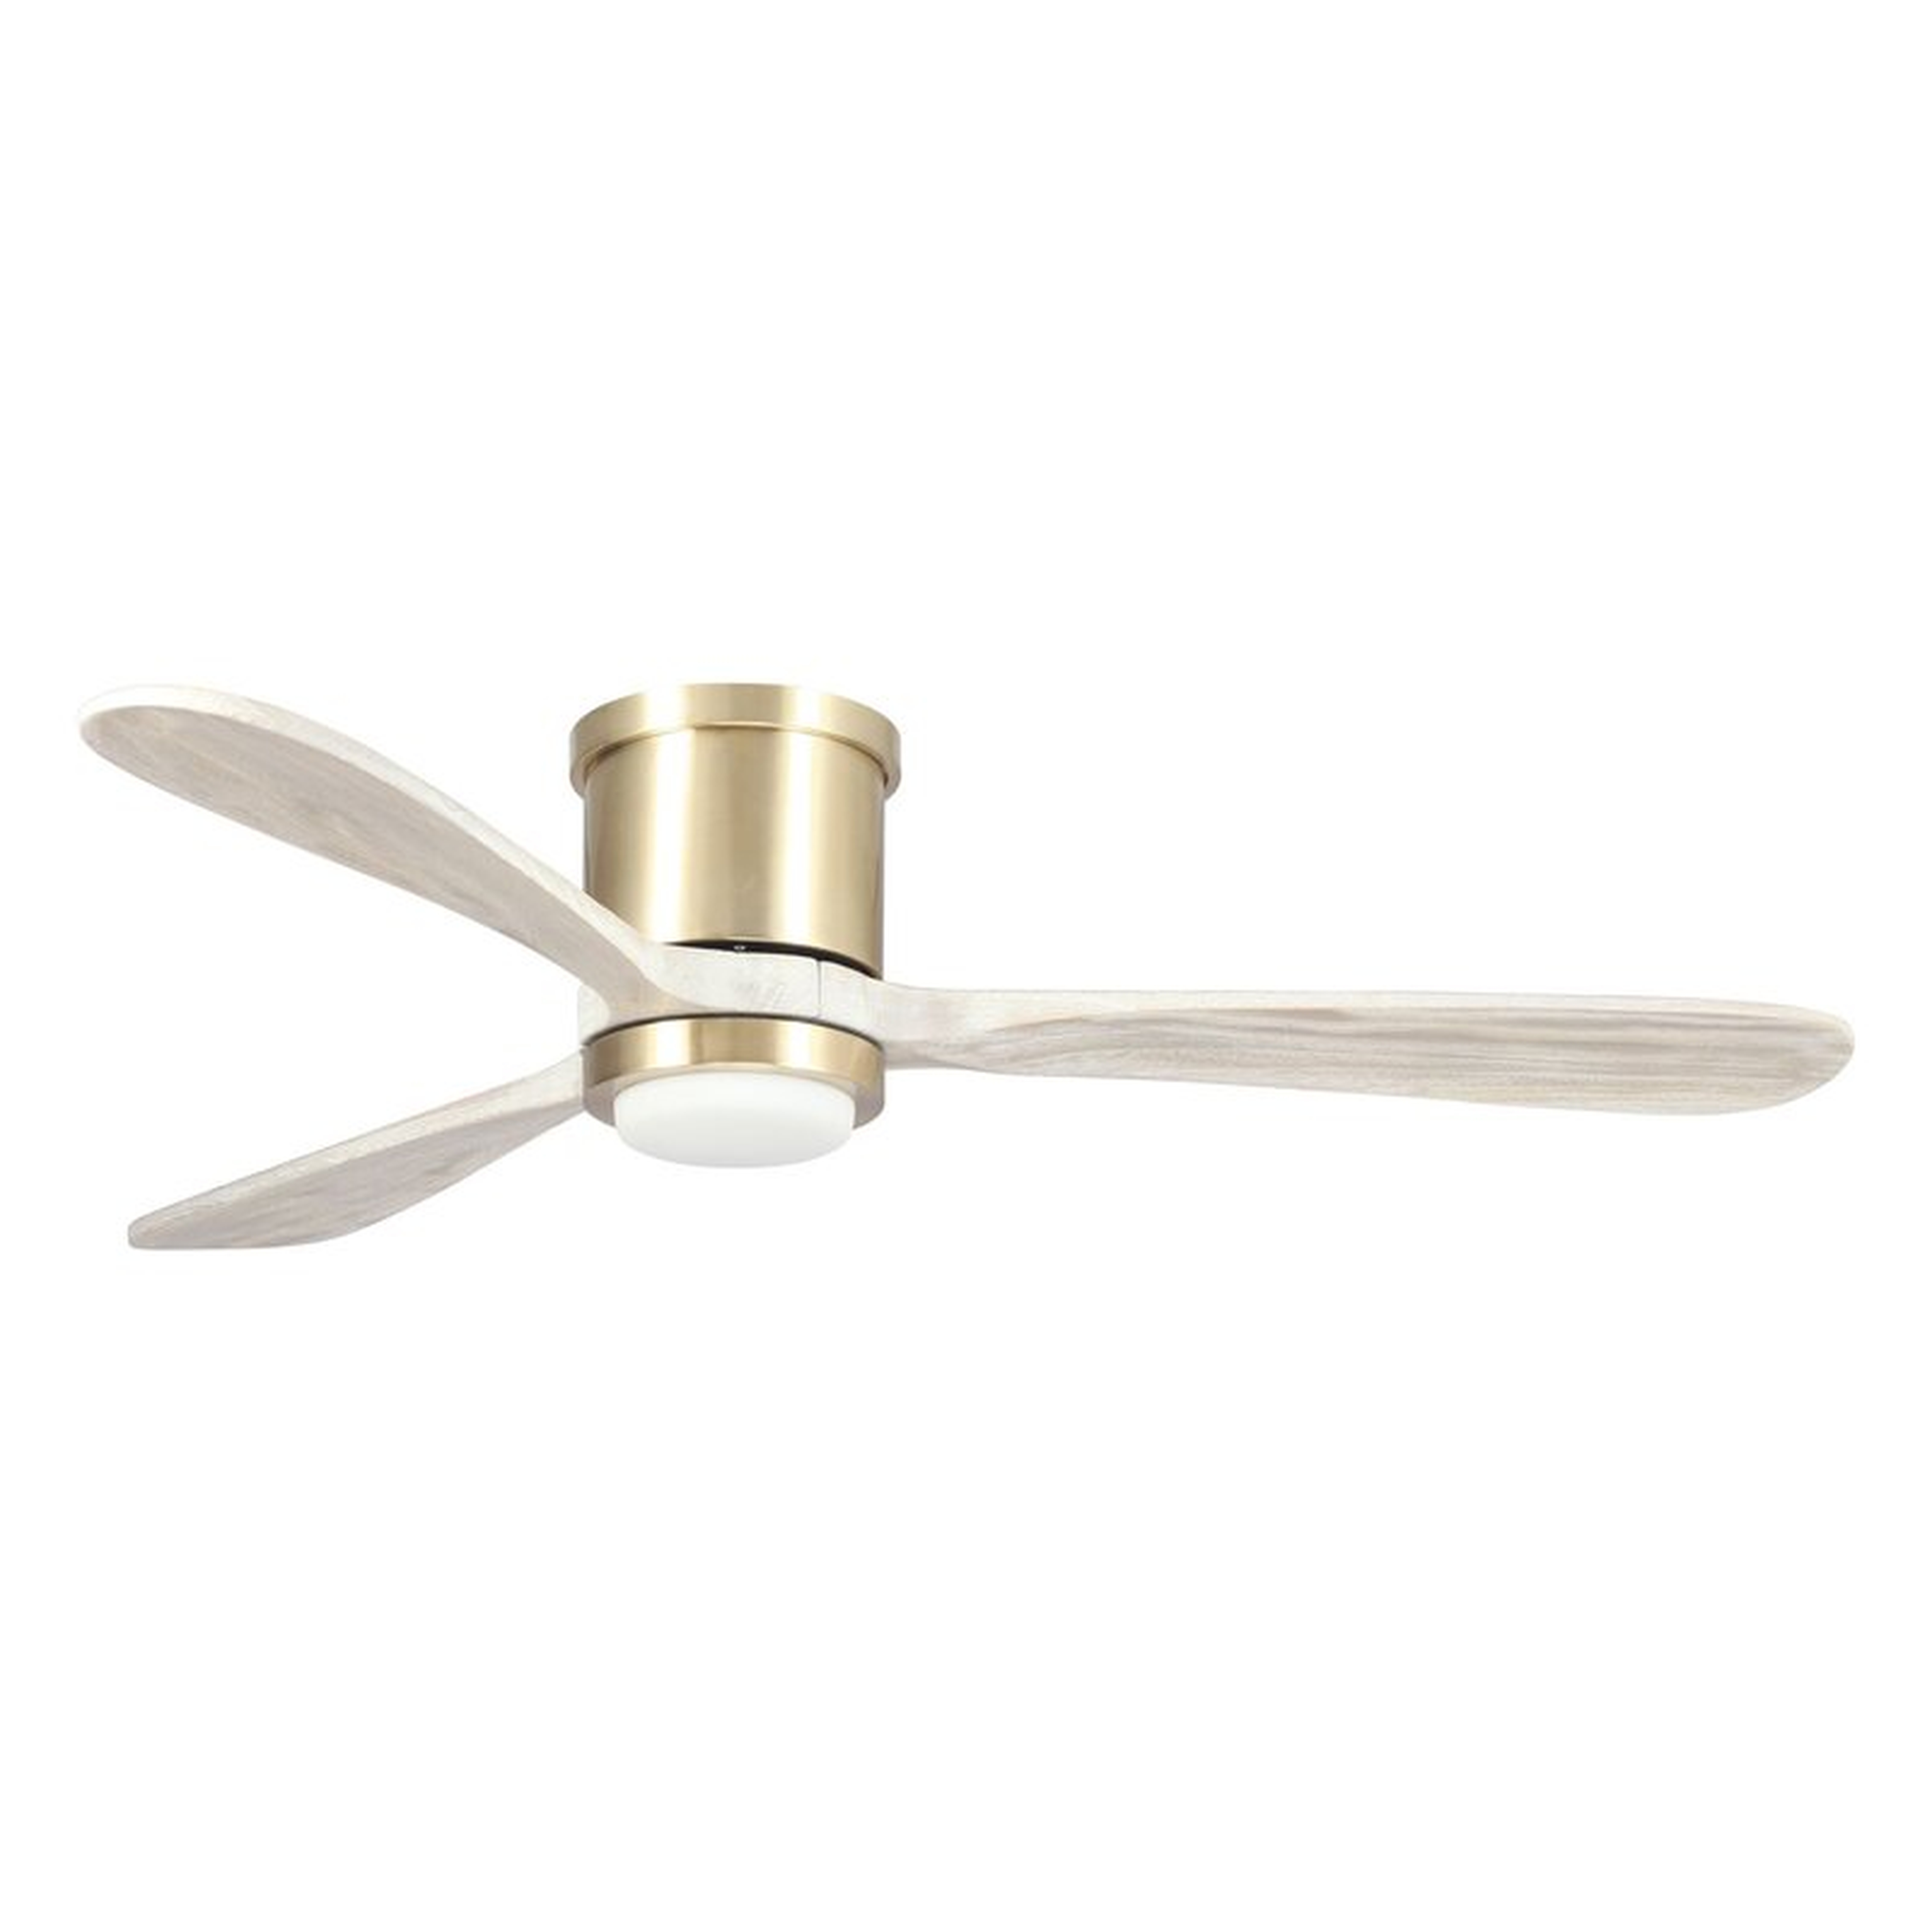 52'' Heatherton 3-Blade LED Propeller Ceiling Fan with Remote Control & Light Kit Included - Wayfair